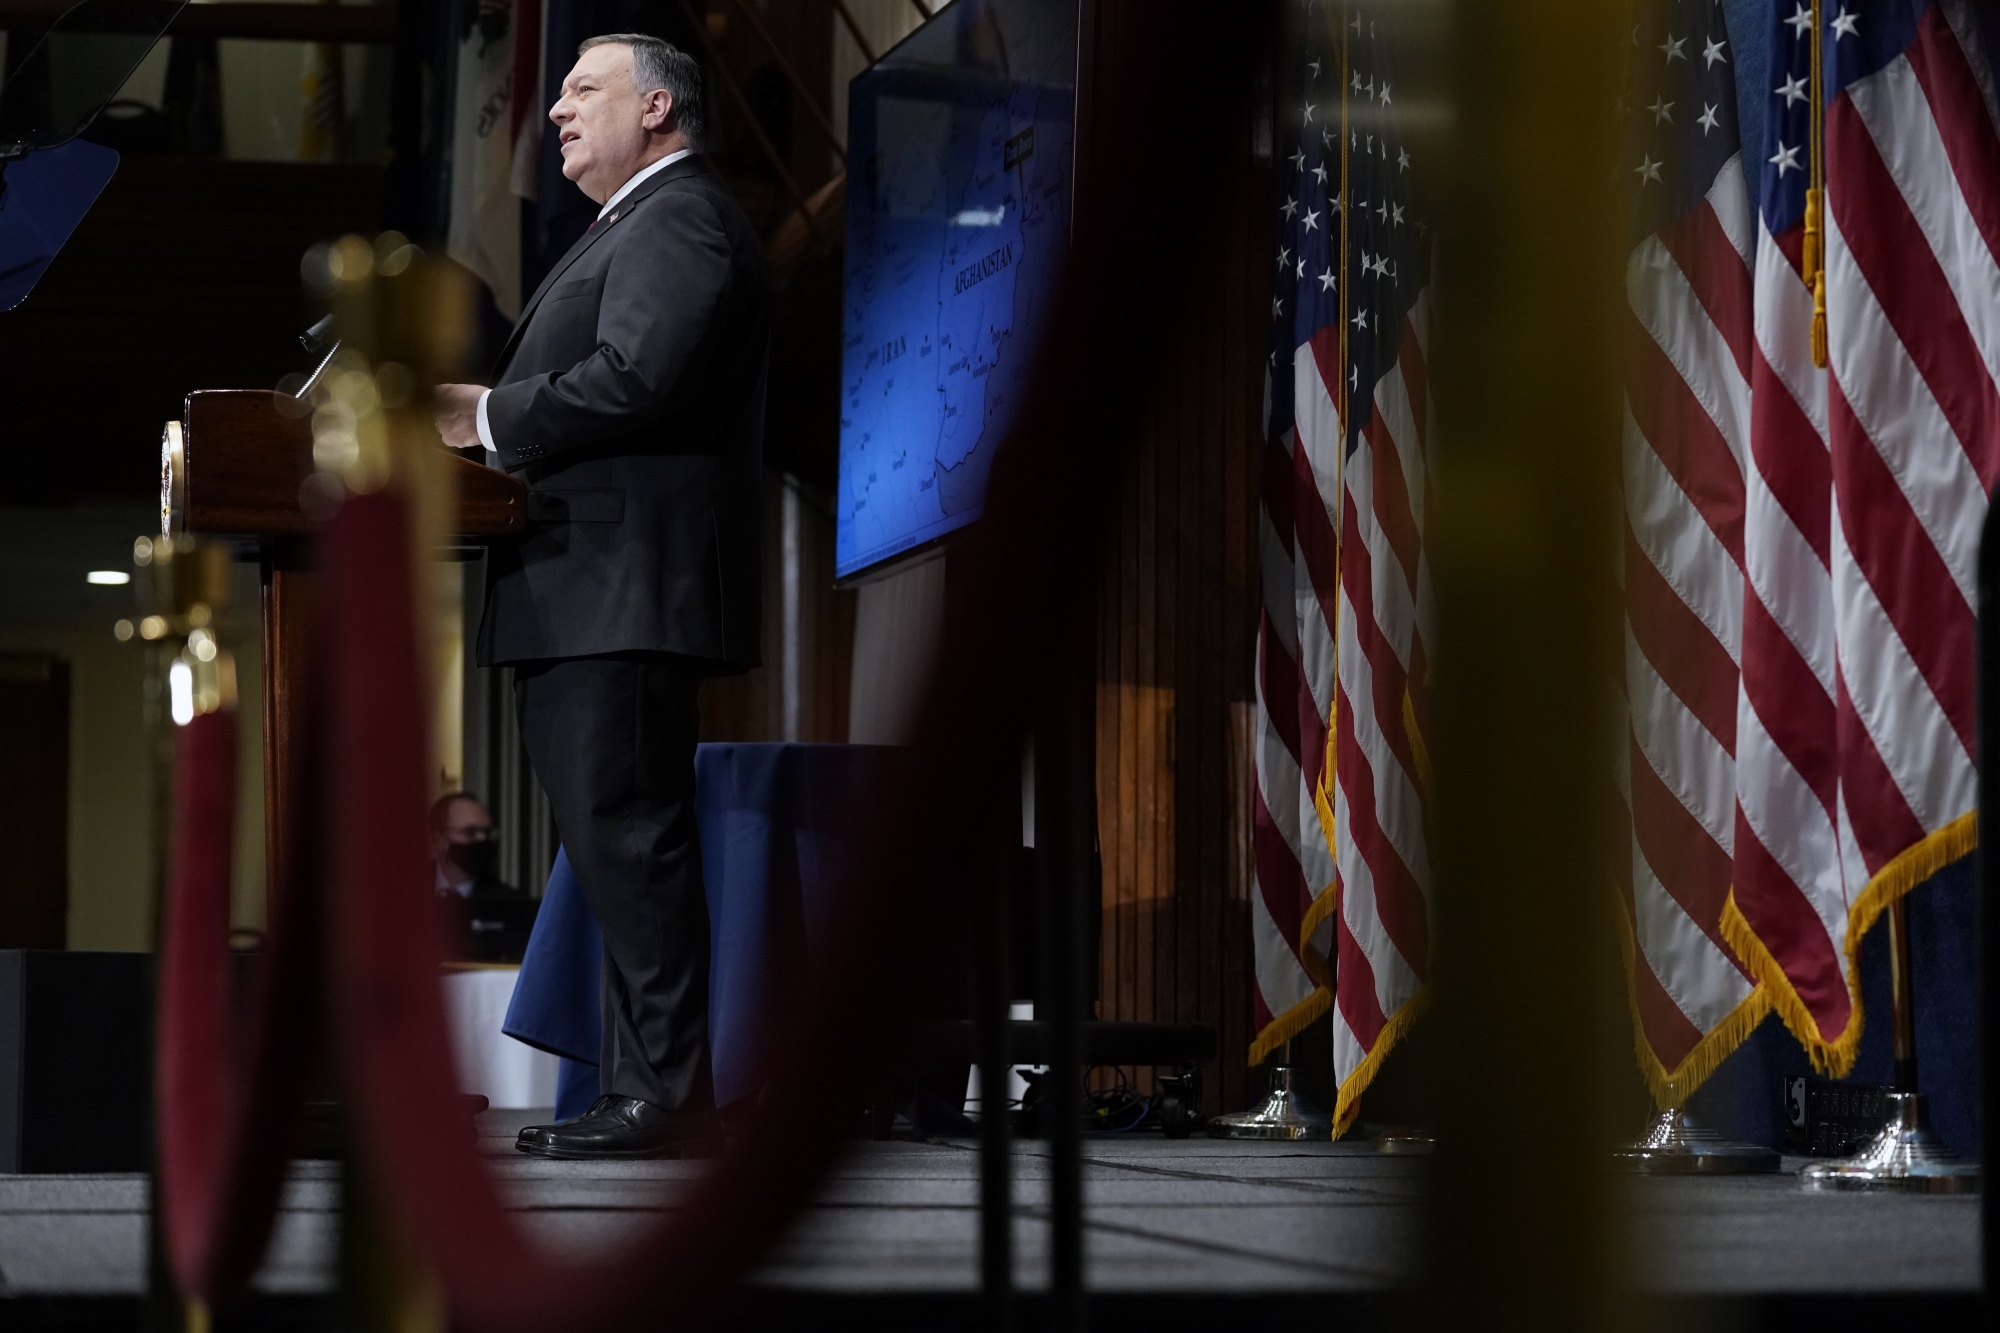 Secretary of State Mike Pompeo speaks at the National Press Club in Washington, Tuesday, Jan. 12, 2021. (AP Photo/Andrew Harnik, Pool) ArcInfo